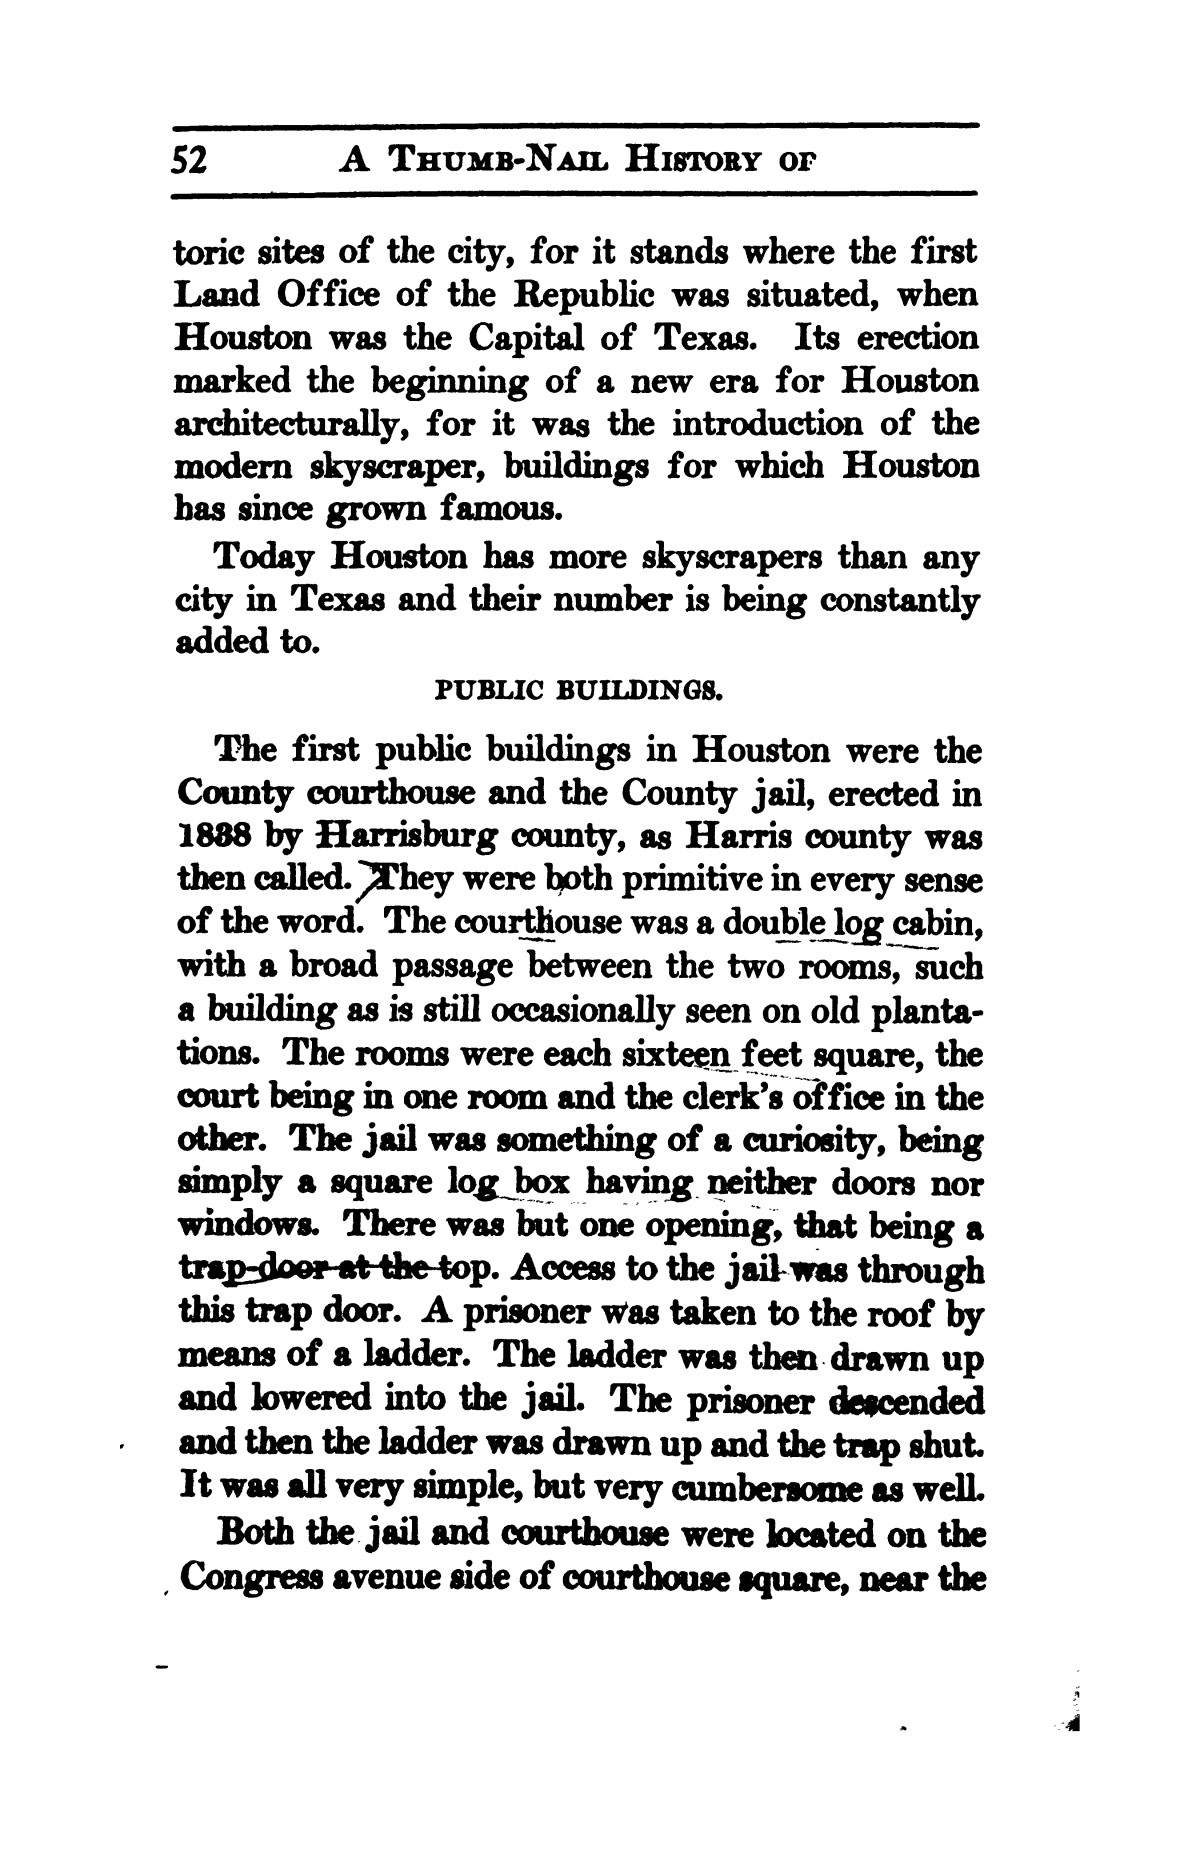 A thumb-nail history of the city of Houston, Texas, from its founding in 1836 to the year 1912
                                                
                                                    52
                                                